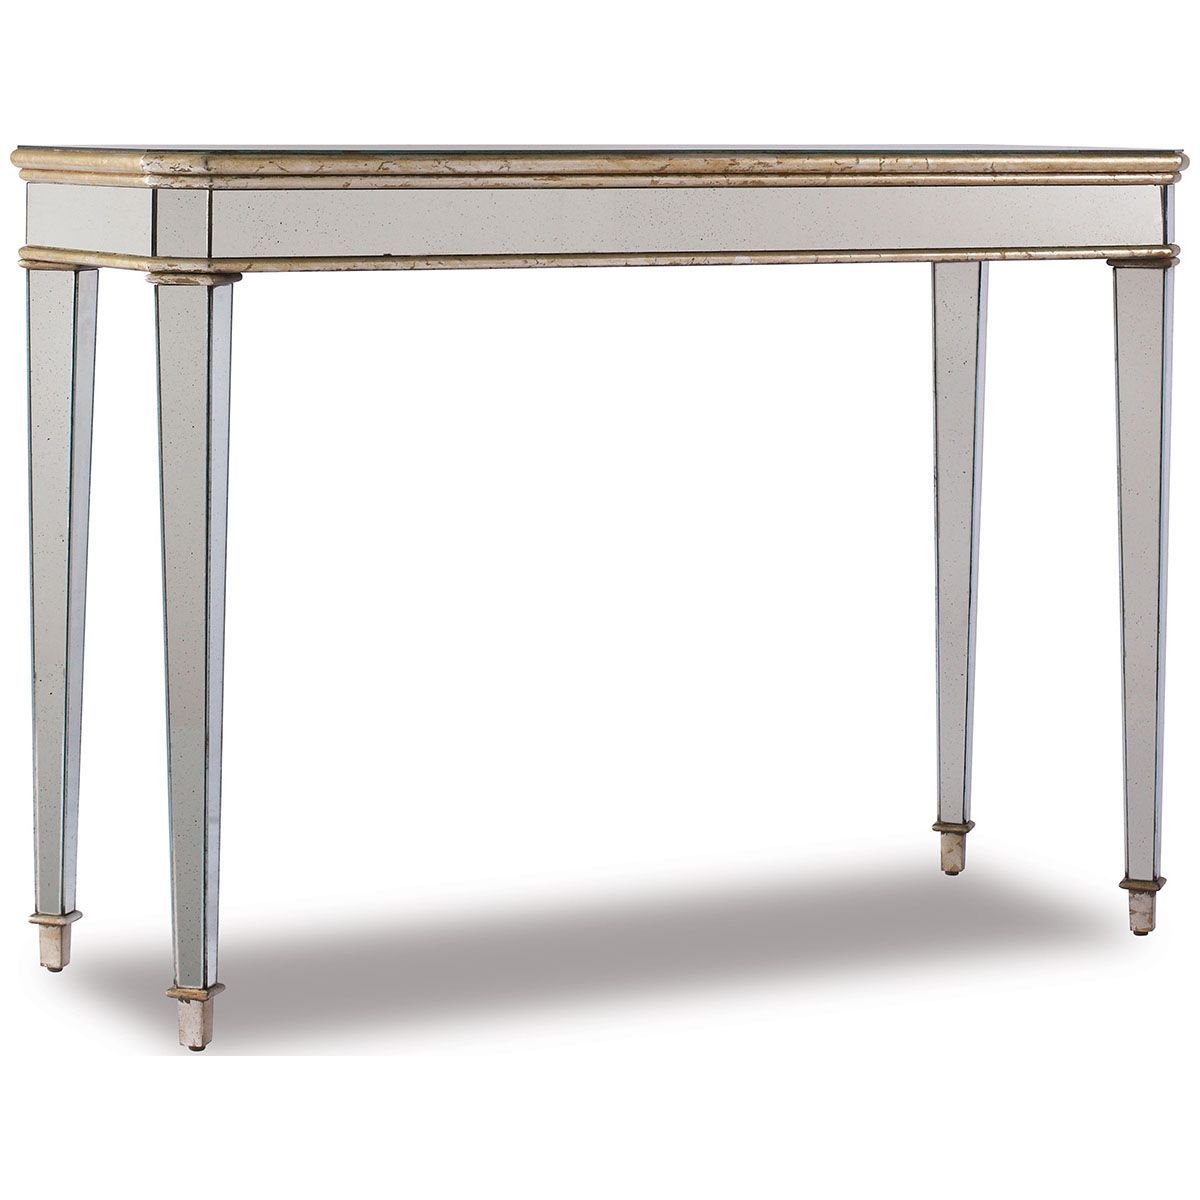 Hooker Furniture Mirrored Console Table 500 50 779 | Hooker Intended For Kyra Console Tables (View 18 of 30)